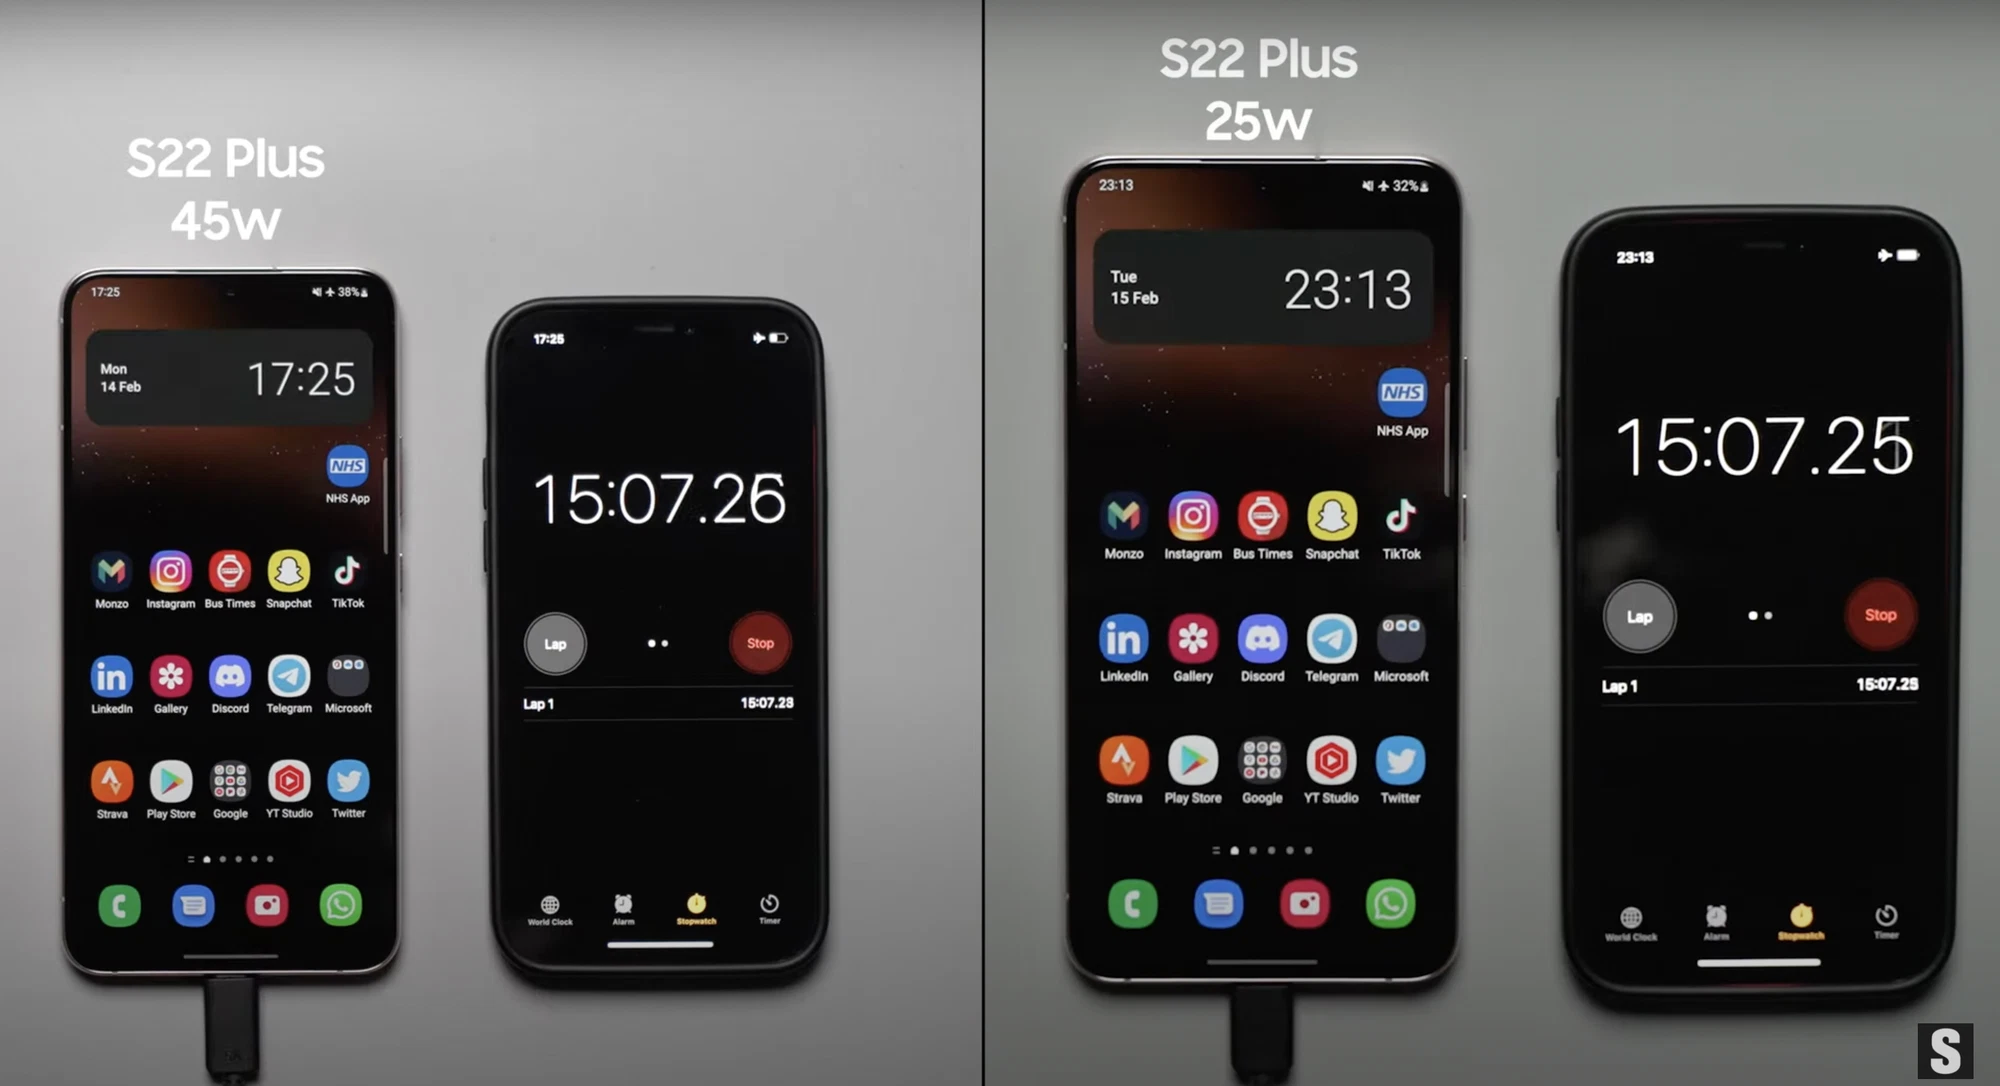 In the first 15 minutes, the S22+ with 45W fast charging brought back 38% of the battery, the S22+ with 25W fast charging only brought back 32% of the battery.